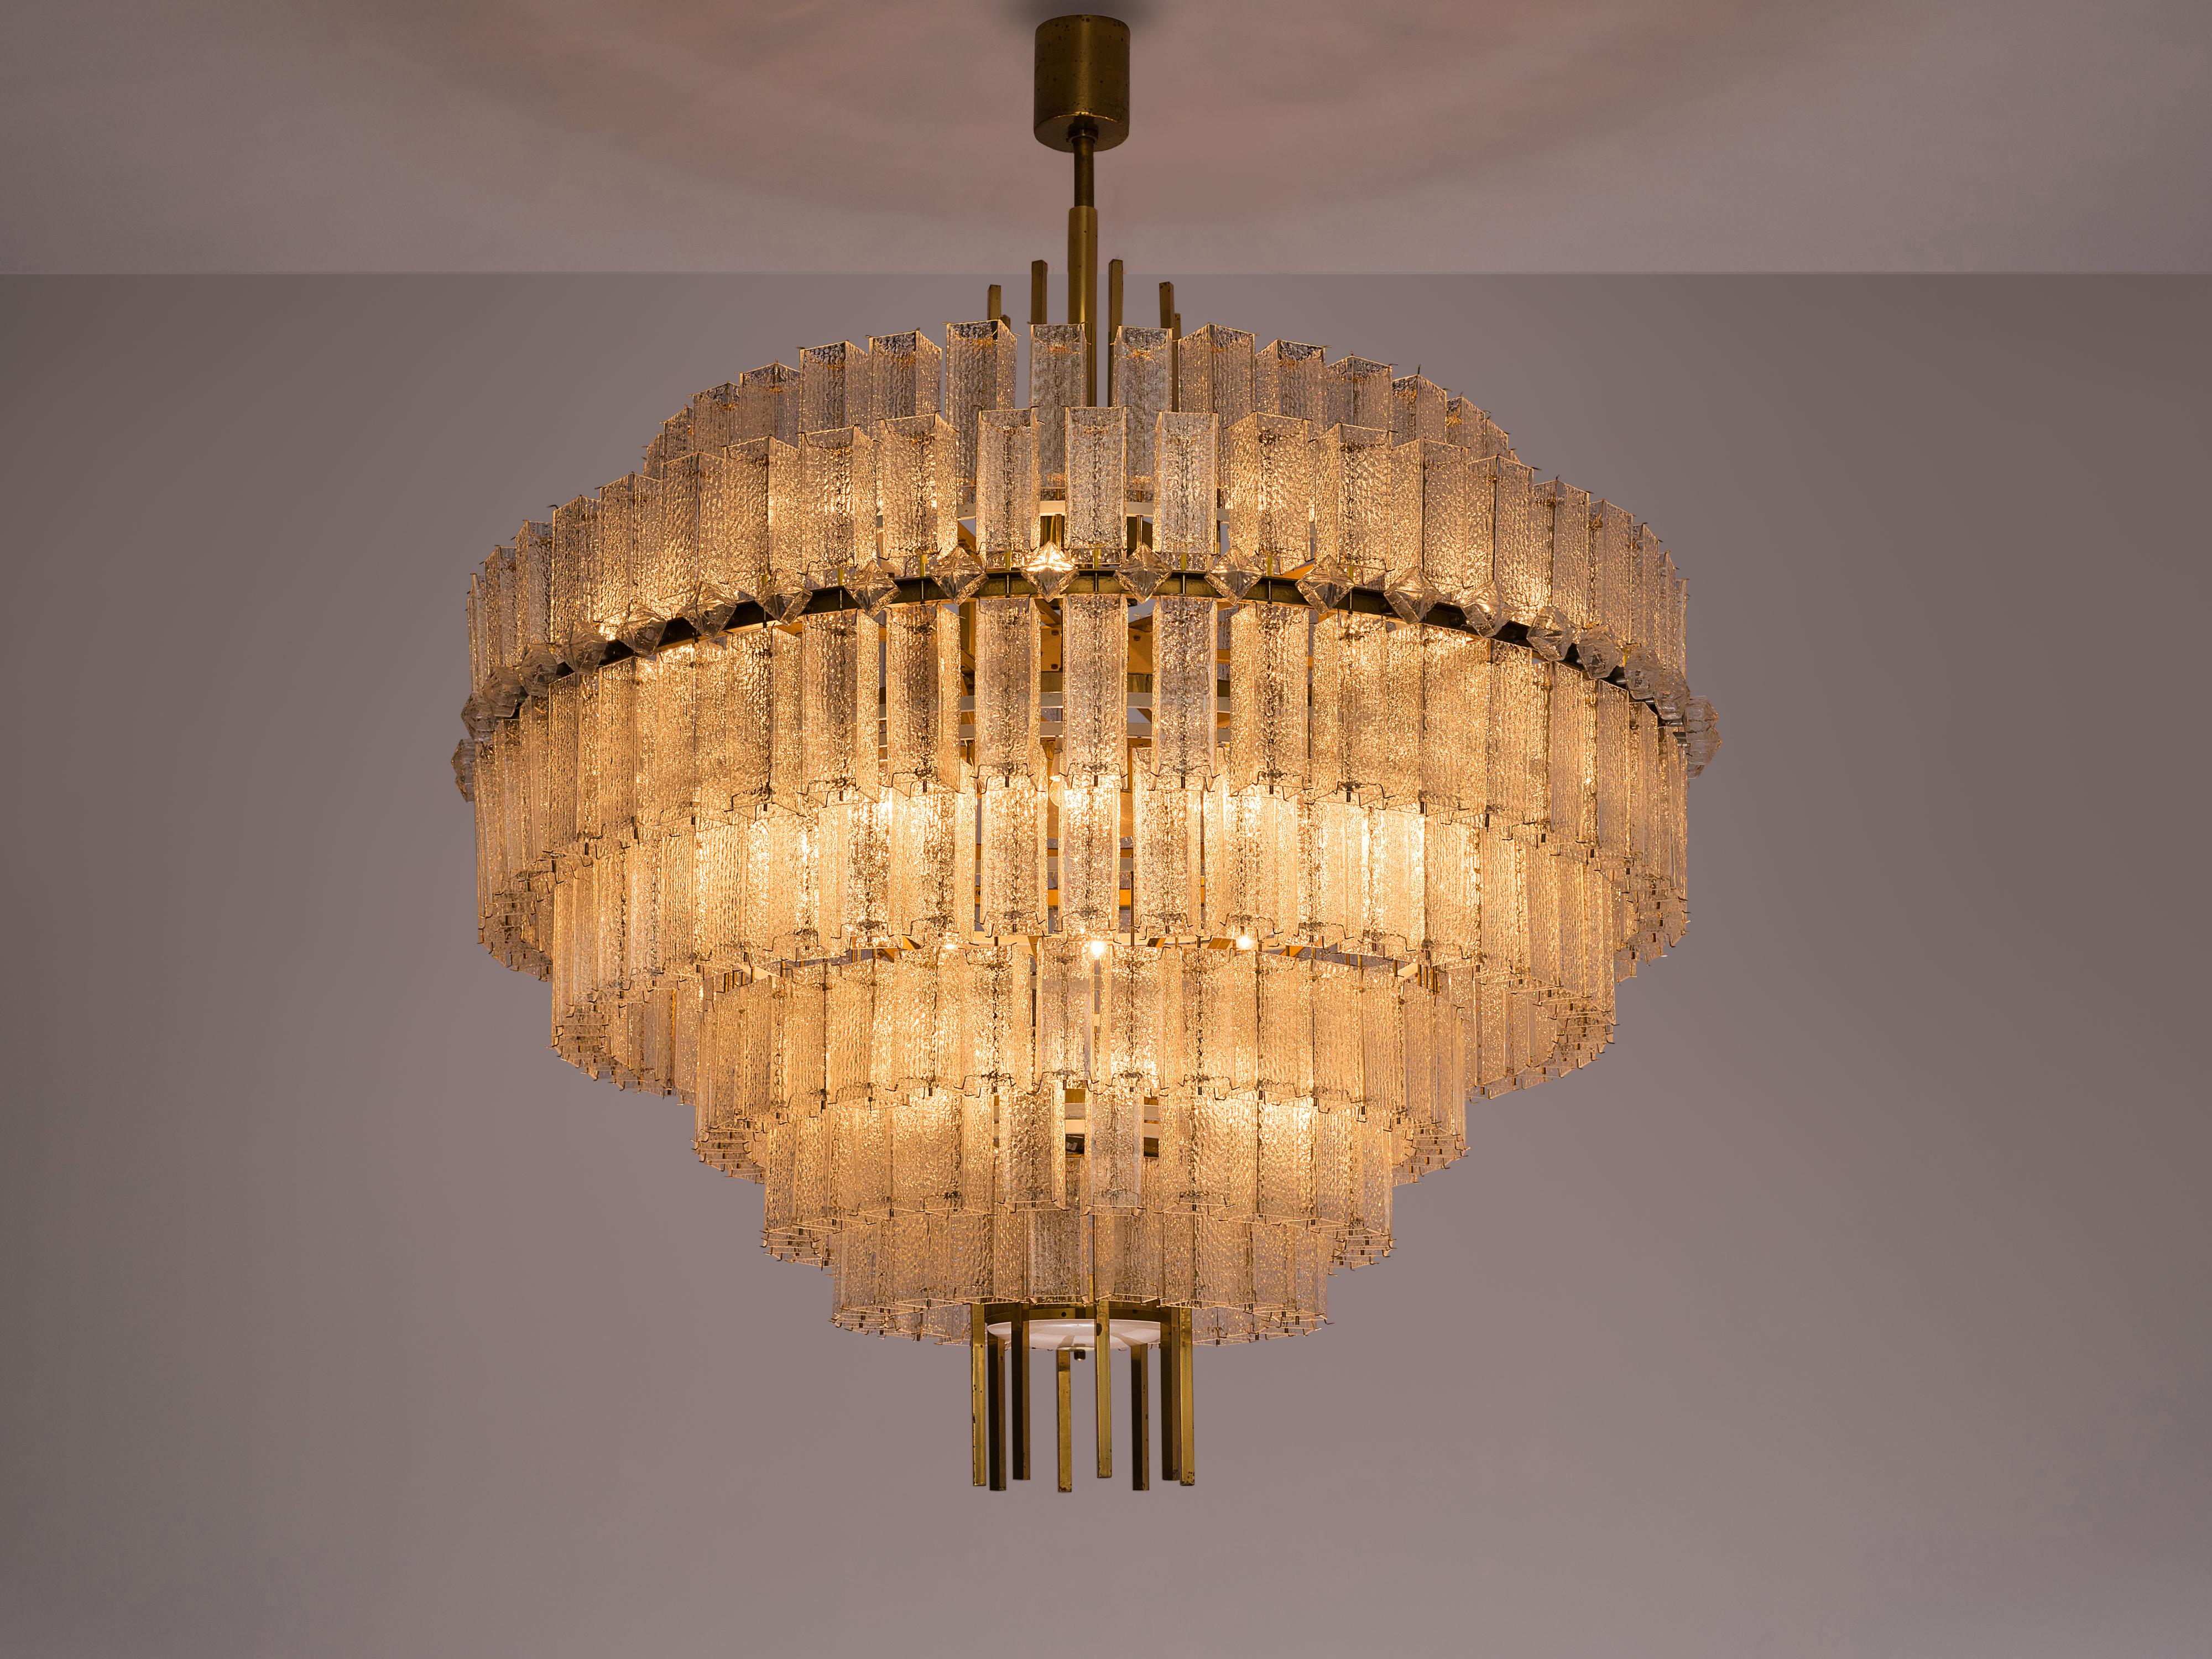 Large chandelier, glass, brass, Europe, 1970s.

Large circular 200 cm/6.5 ft chandelier with seven layers of glass shades. The frame is made of brass and holds numerous structured glass 'tubes' with a brass centre. Due to the combination of the